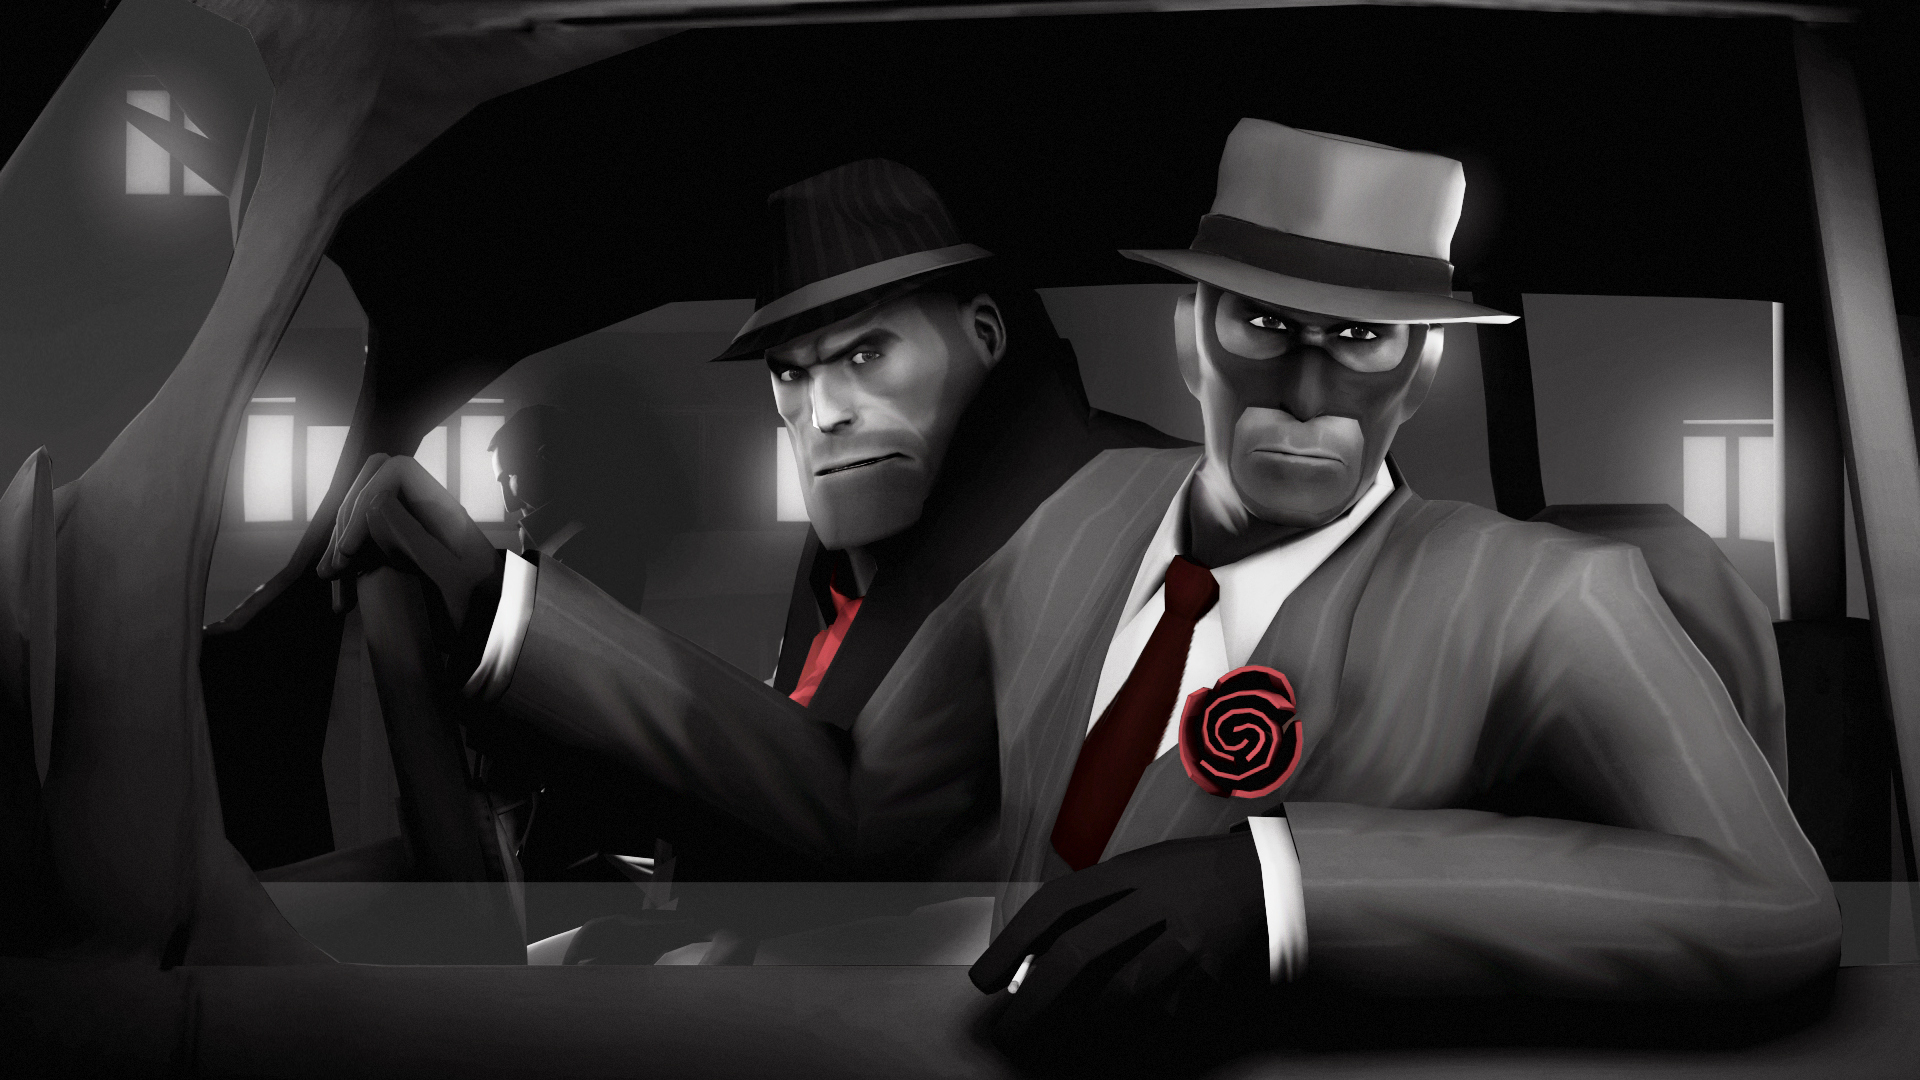 1920x1080 Download wallpaper spy, Team Fortress 2, spy, heavy, black, section games in resoluti